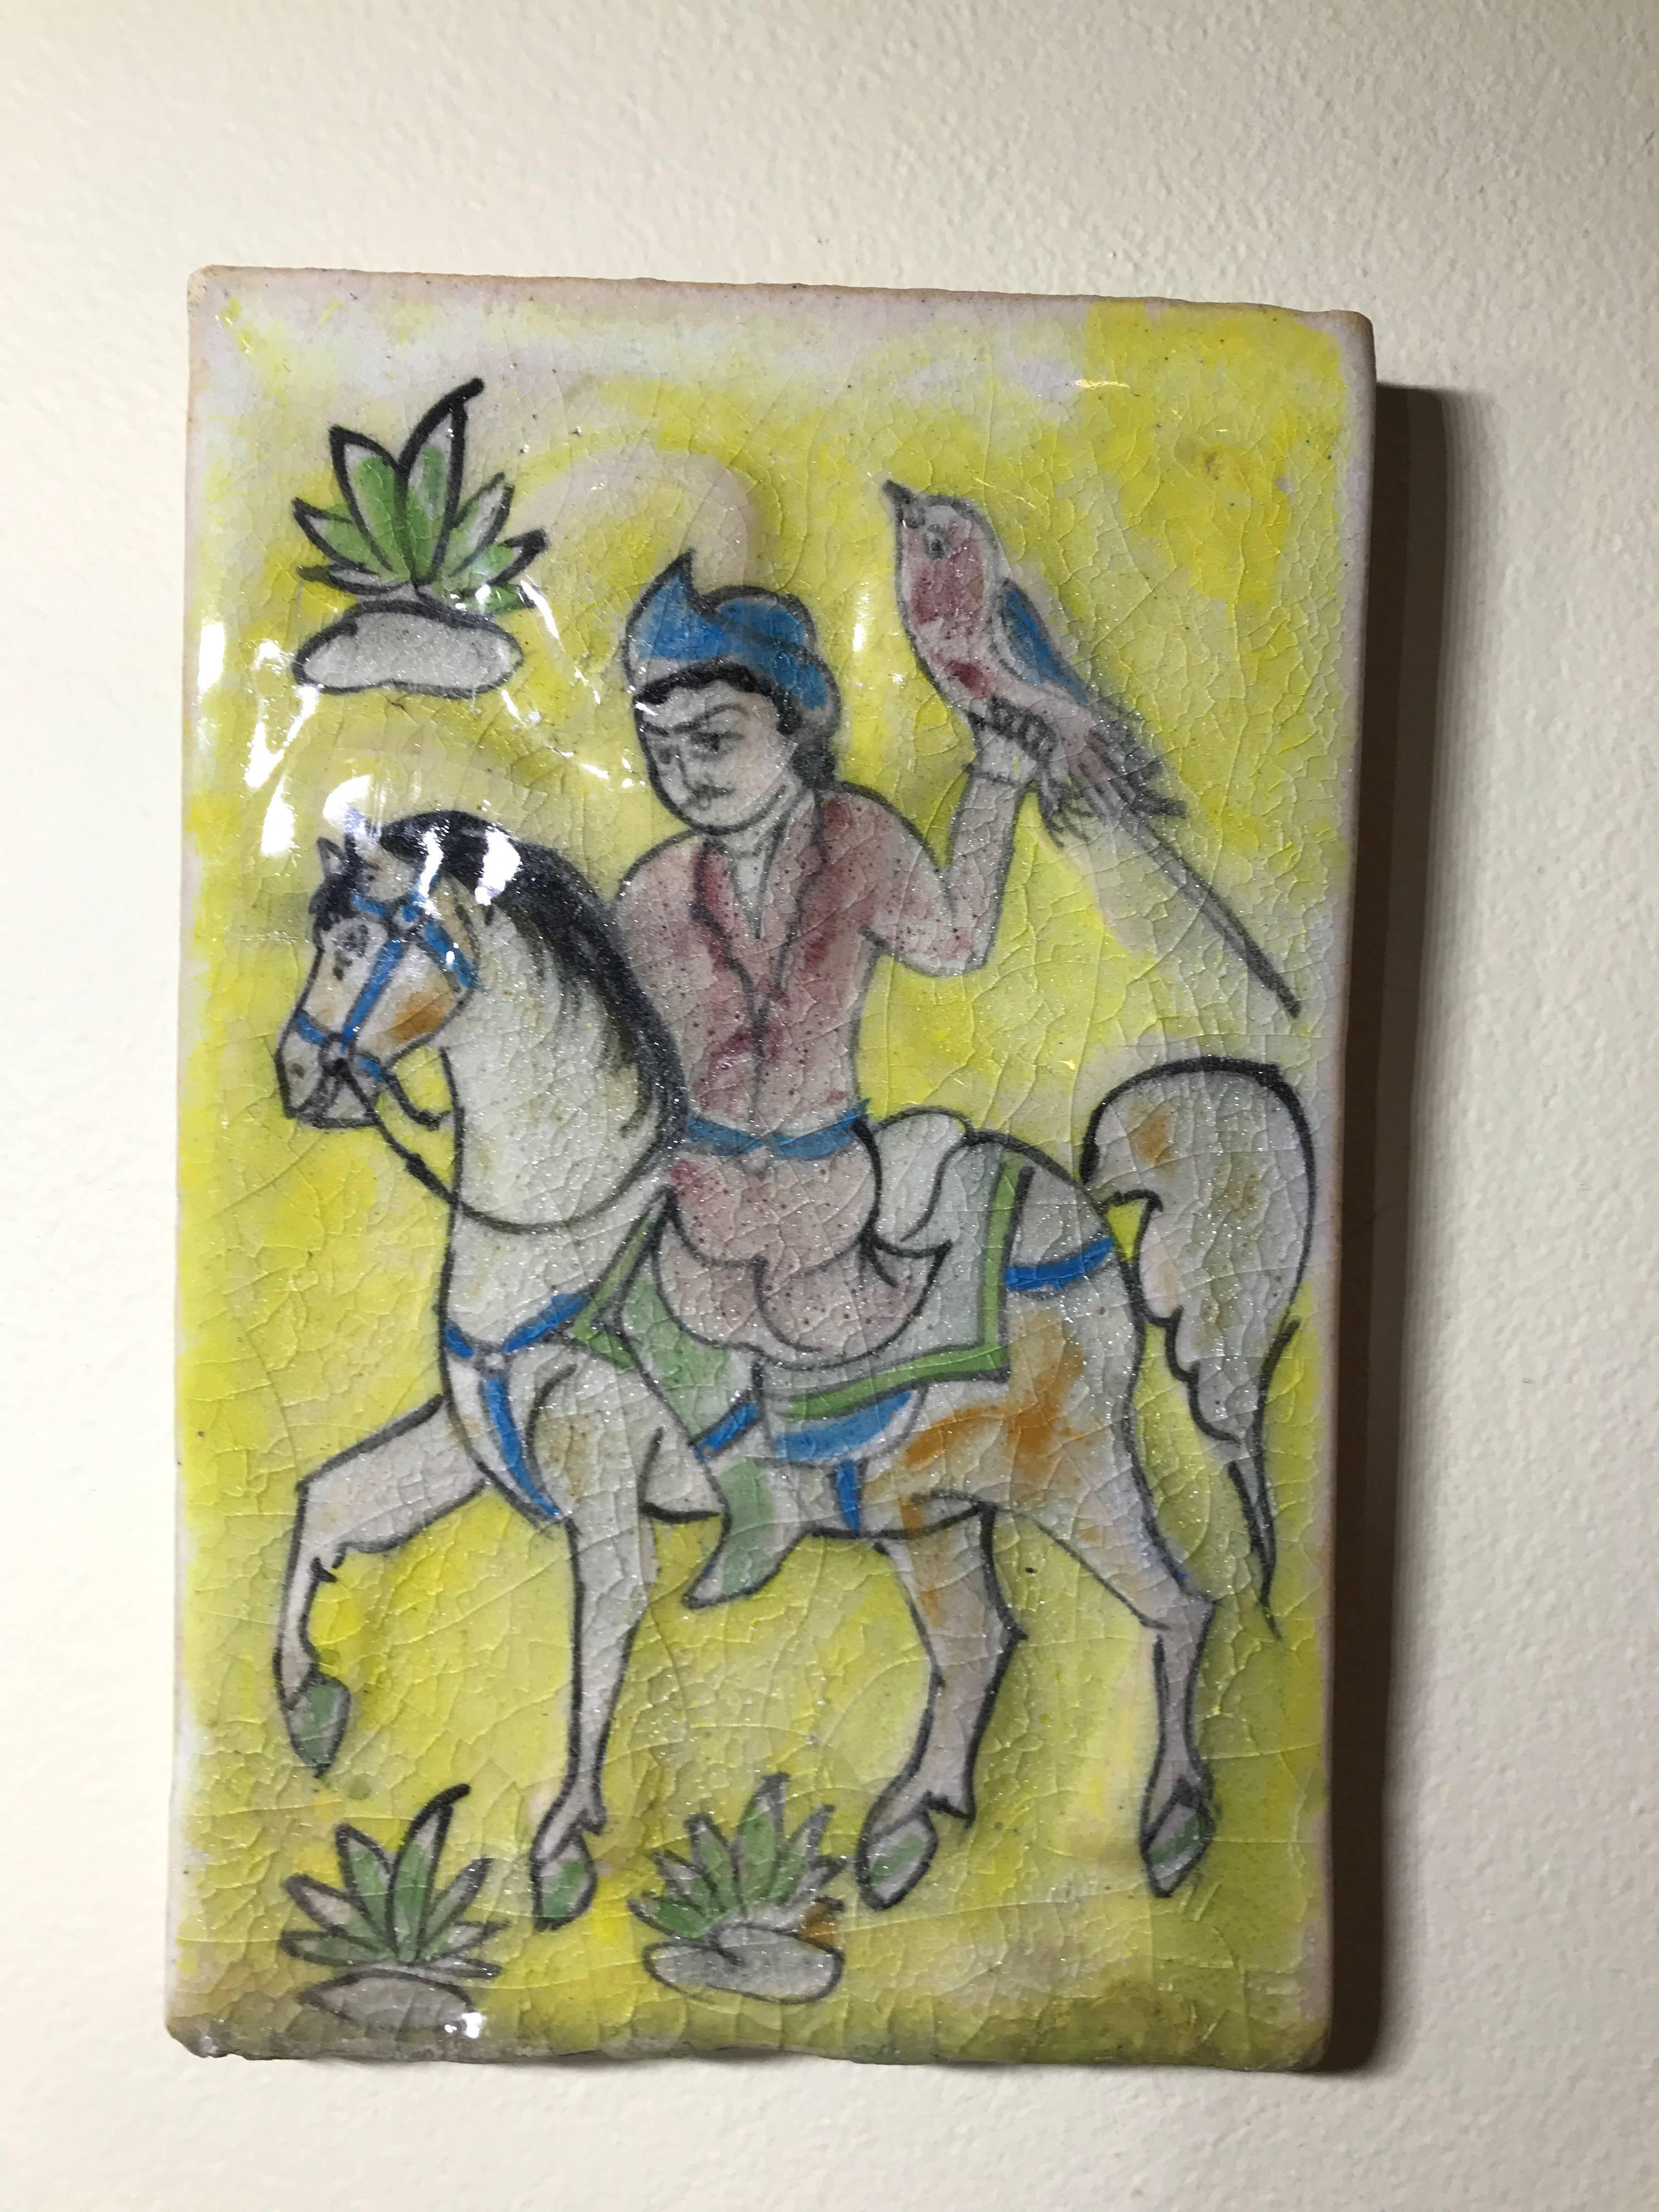 Beautiful ceramic tile hand-painted and glazed of a hunter riding on horse holding bird .great decorative tile to hang on the wall.
 